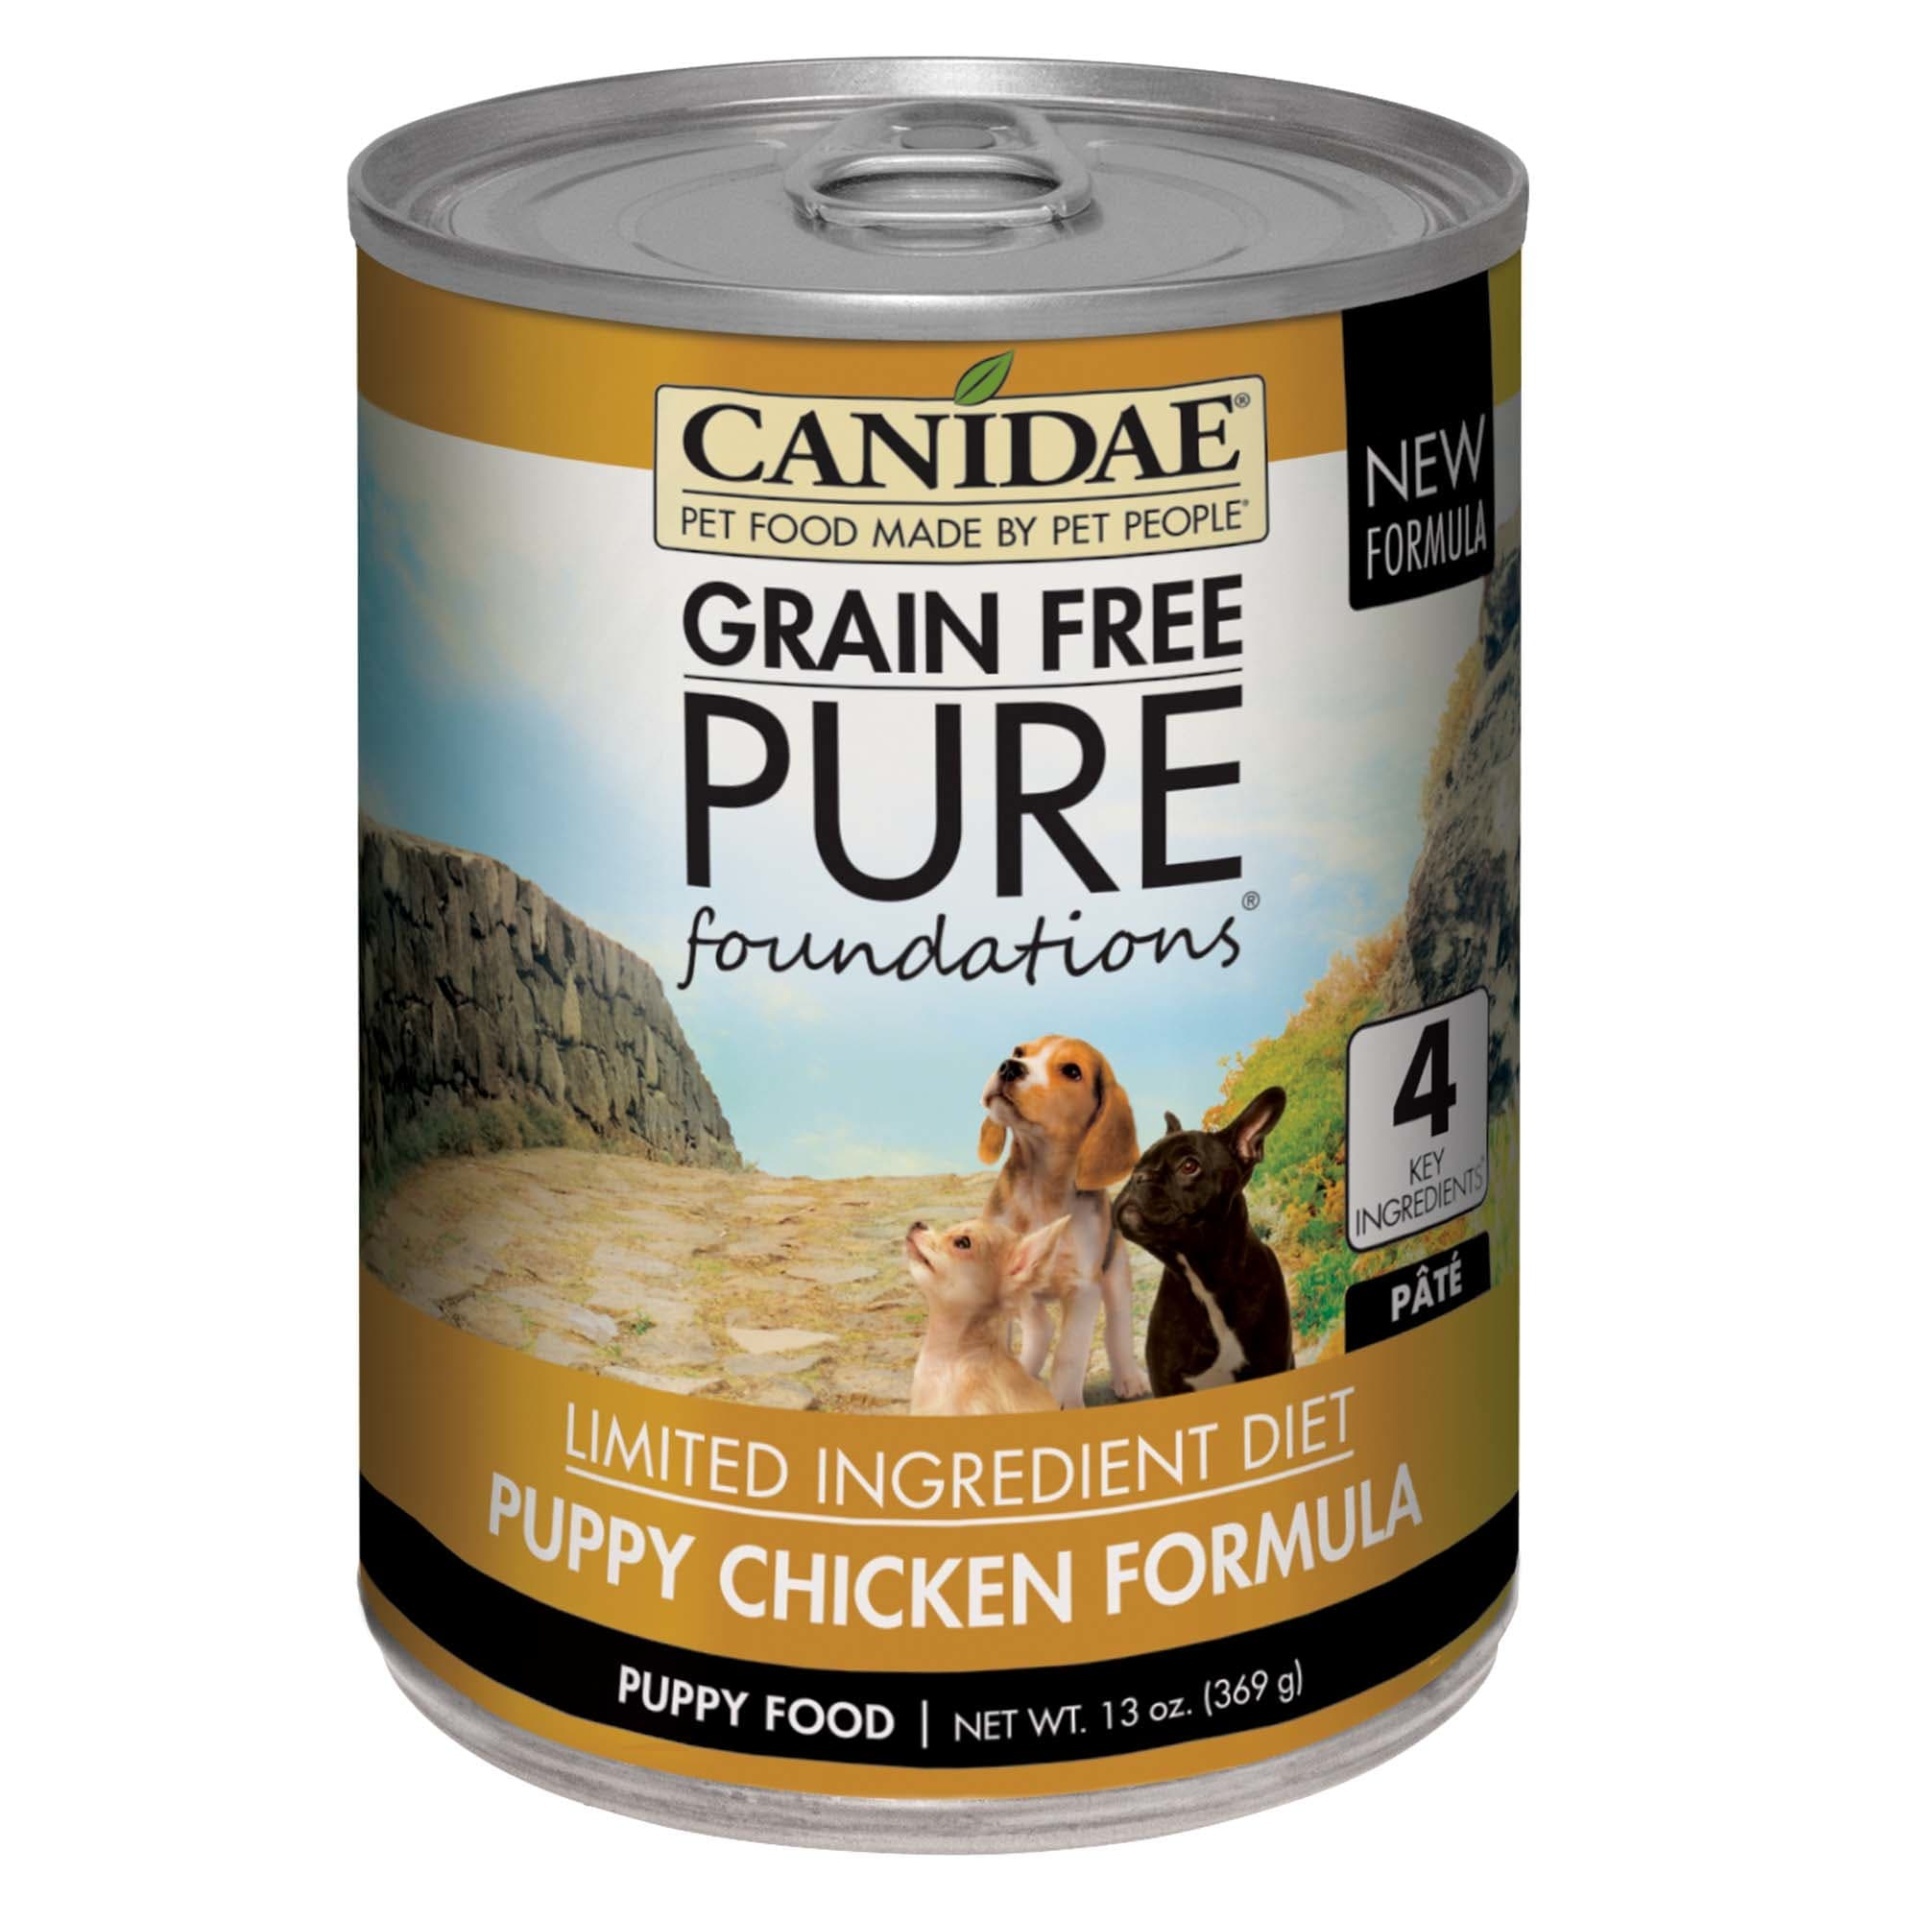 slide 1 of 1, CANIDAE Grain Free Pure Foundations Chicken Puppy Canned Food, 13 oz